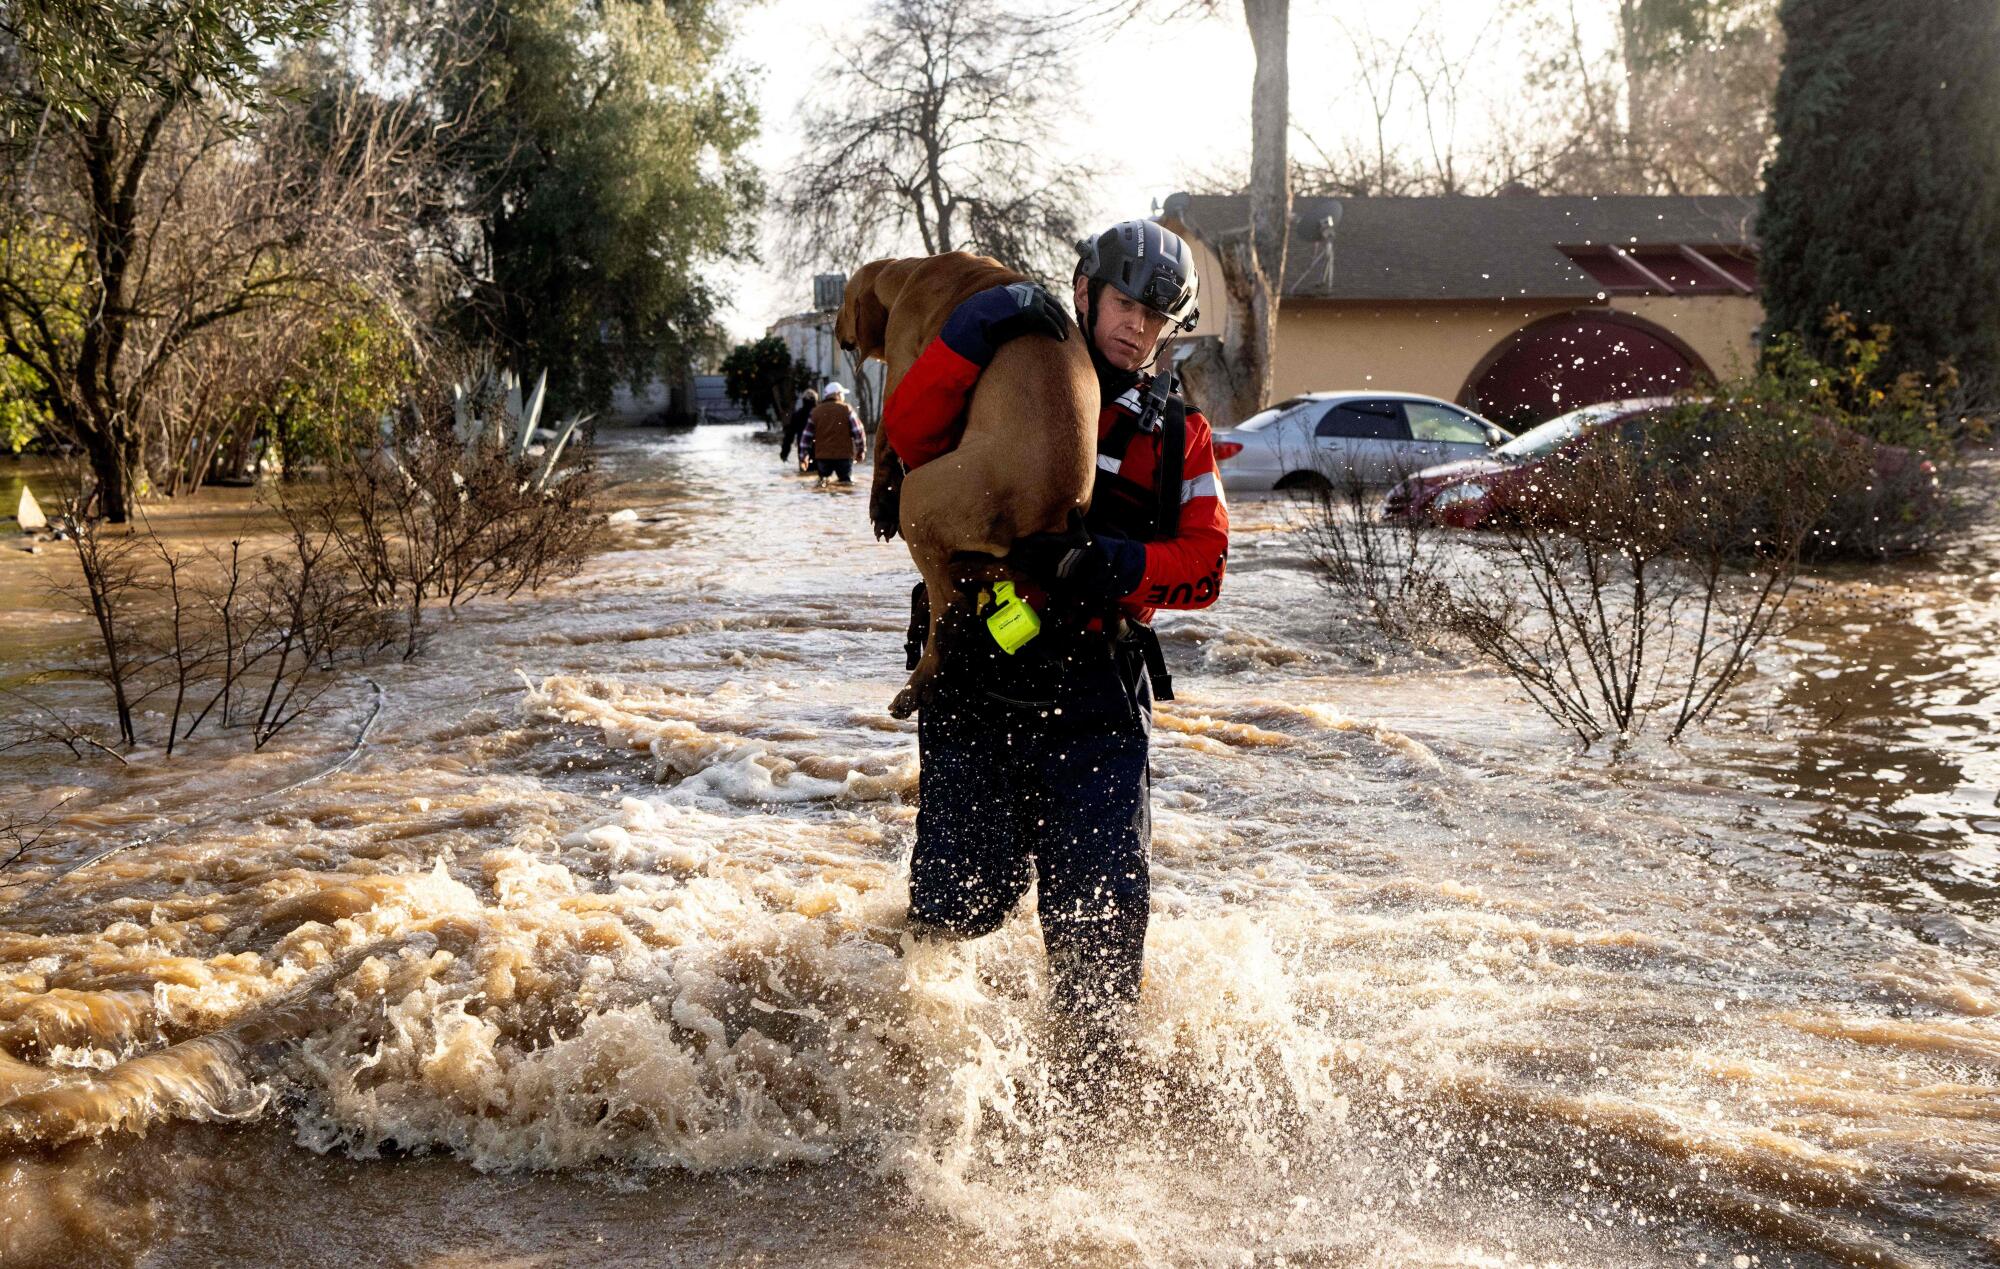 San Diego firefighter Brian Sanford rescues a dog from a flooded home in Merced, California, on Weednesday.